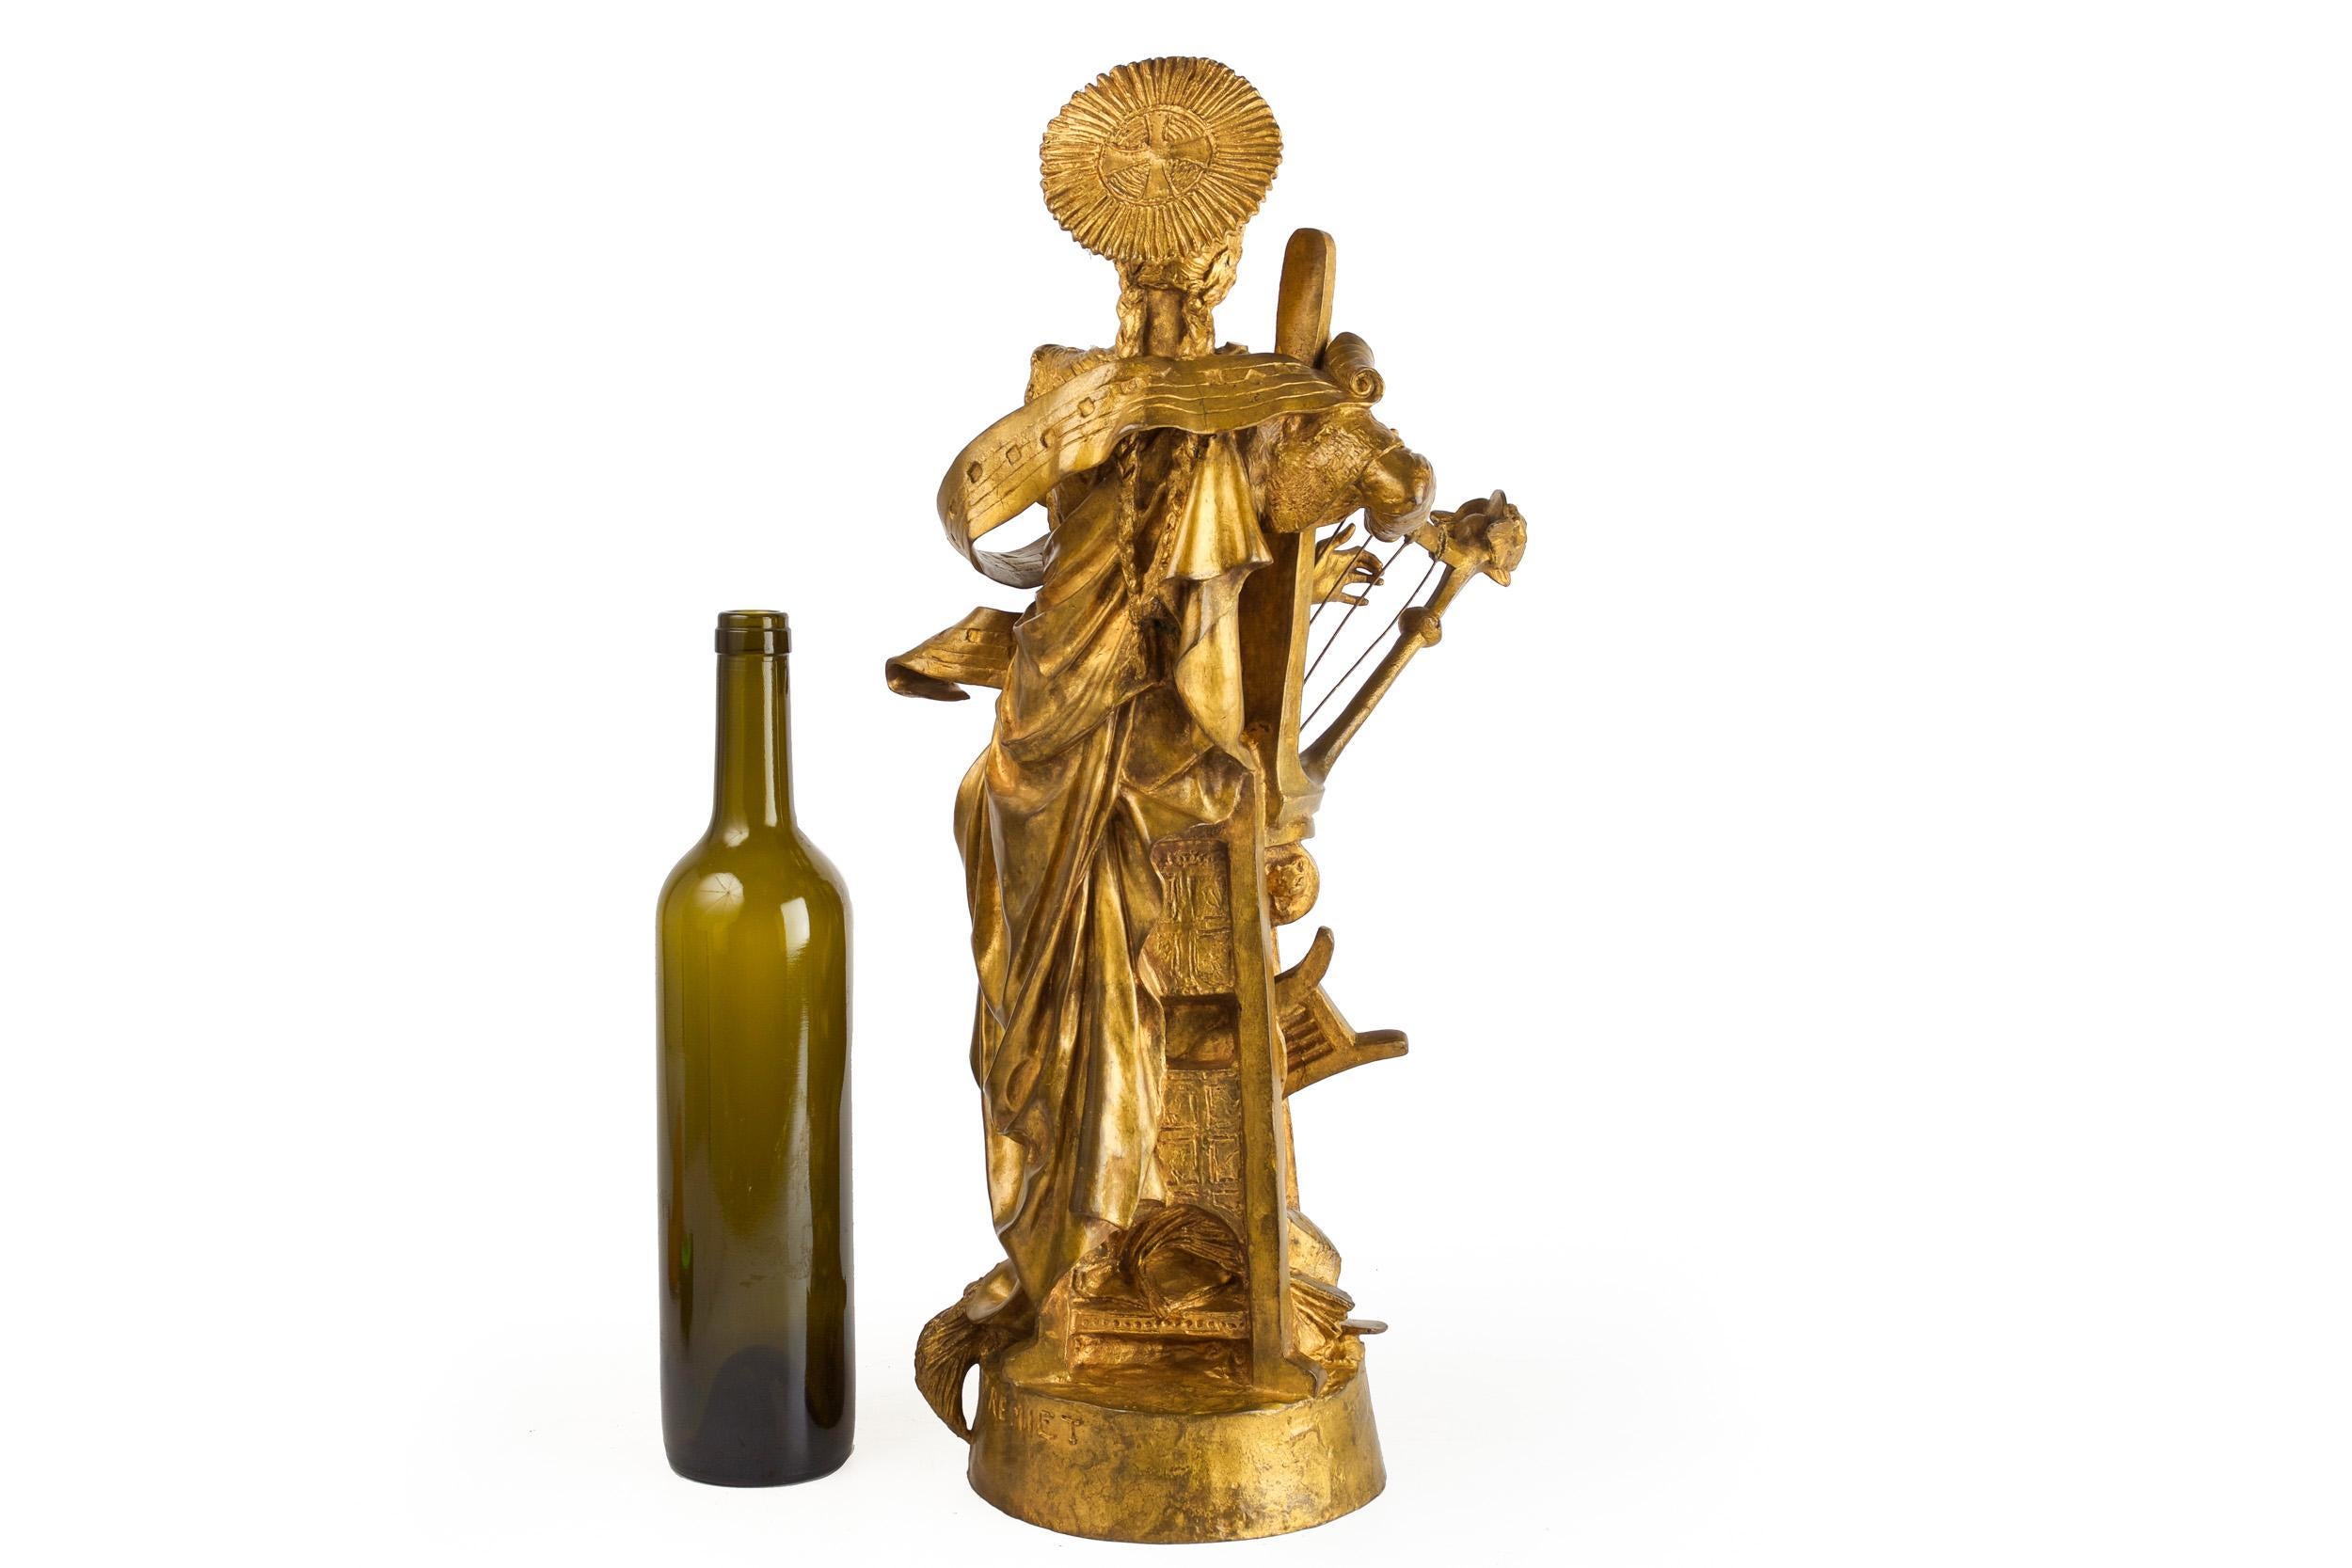 A most rare model of Fremiet's St. Celicia, it features a vibrant gilded patina over a heavily textured and worked bronze. Unlike the carefully finished and often silky surfaces of Fremiet's serialized casts, the present model exhibits more like a